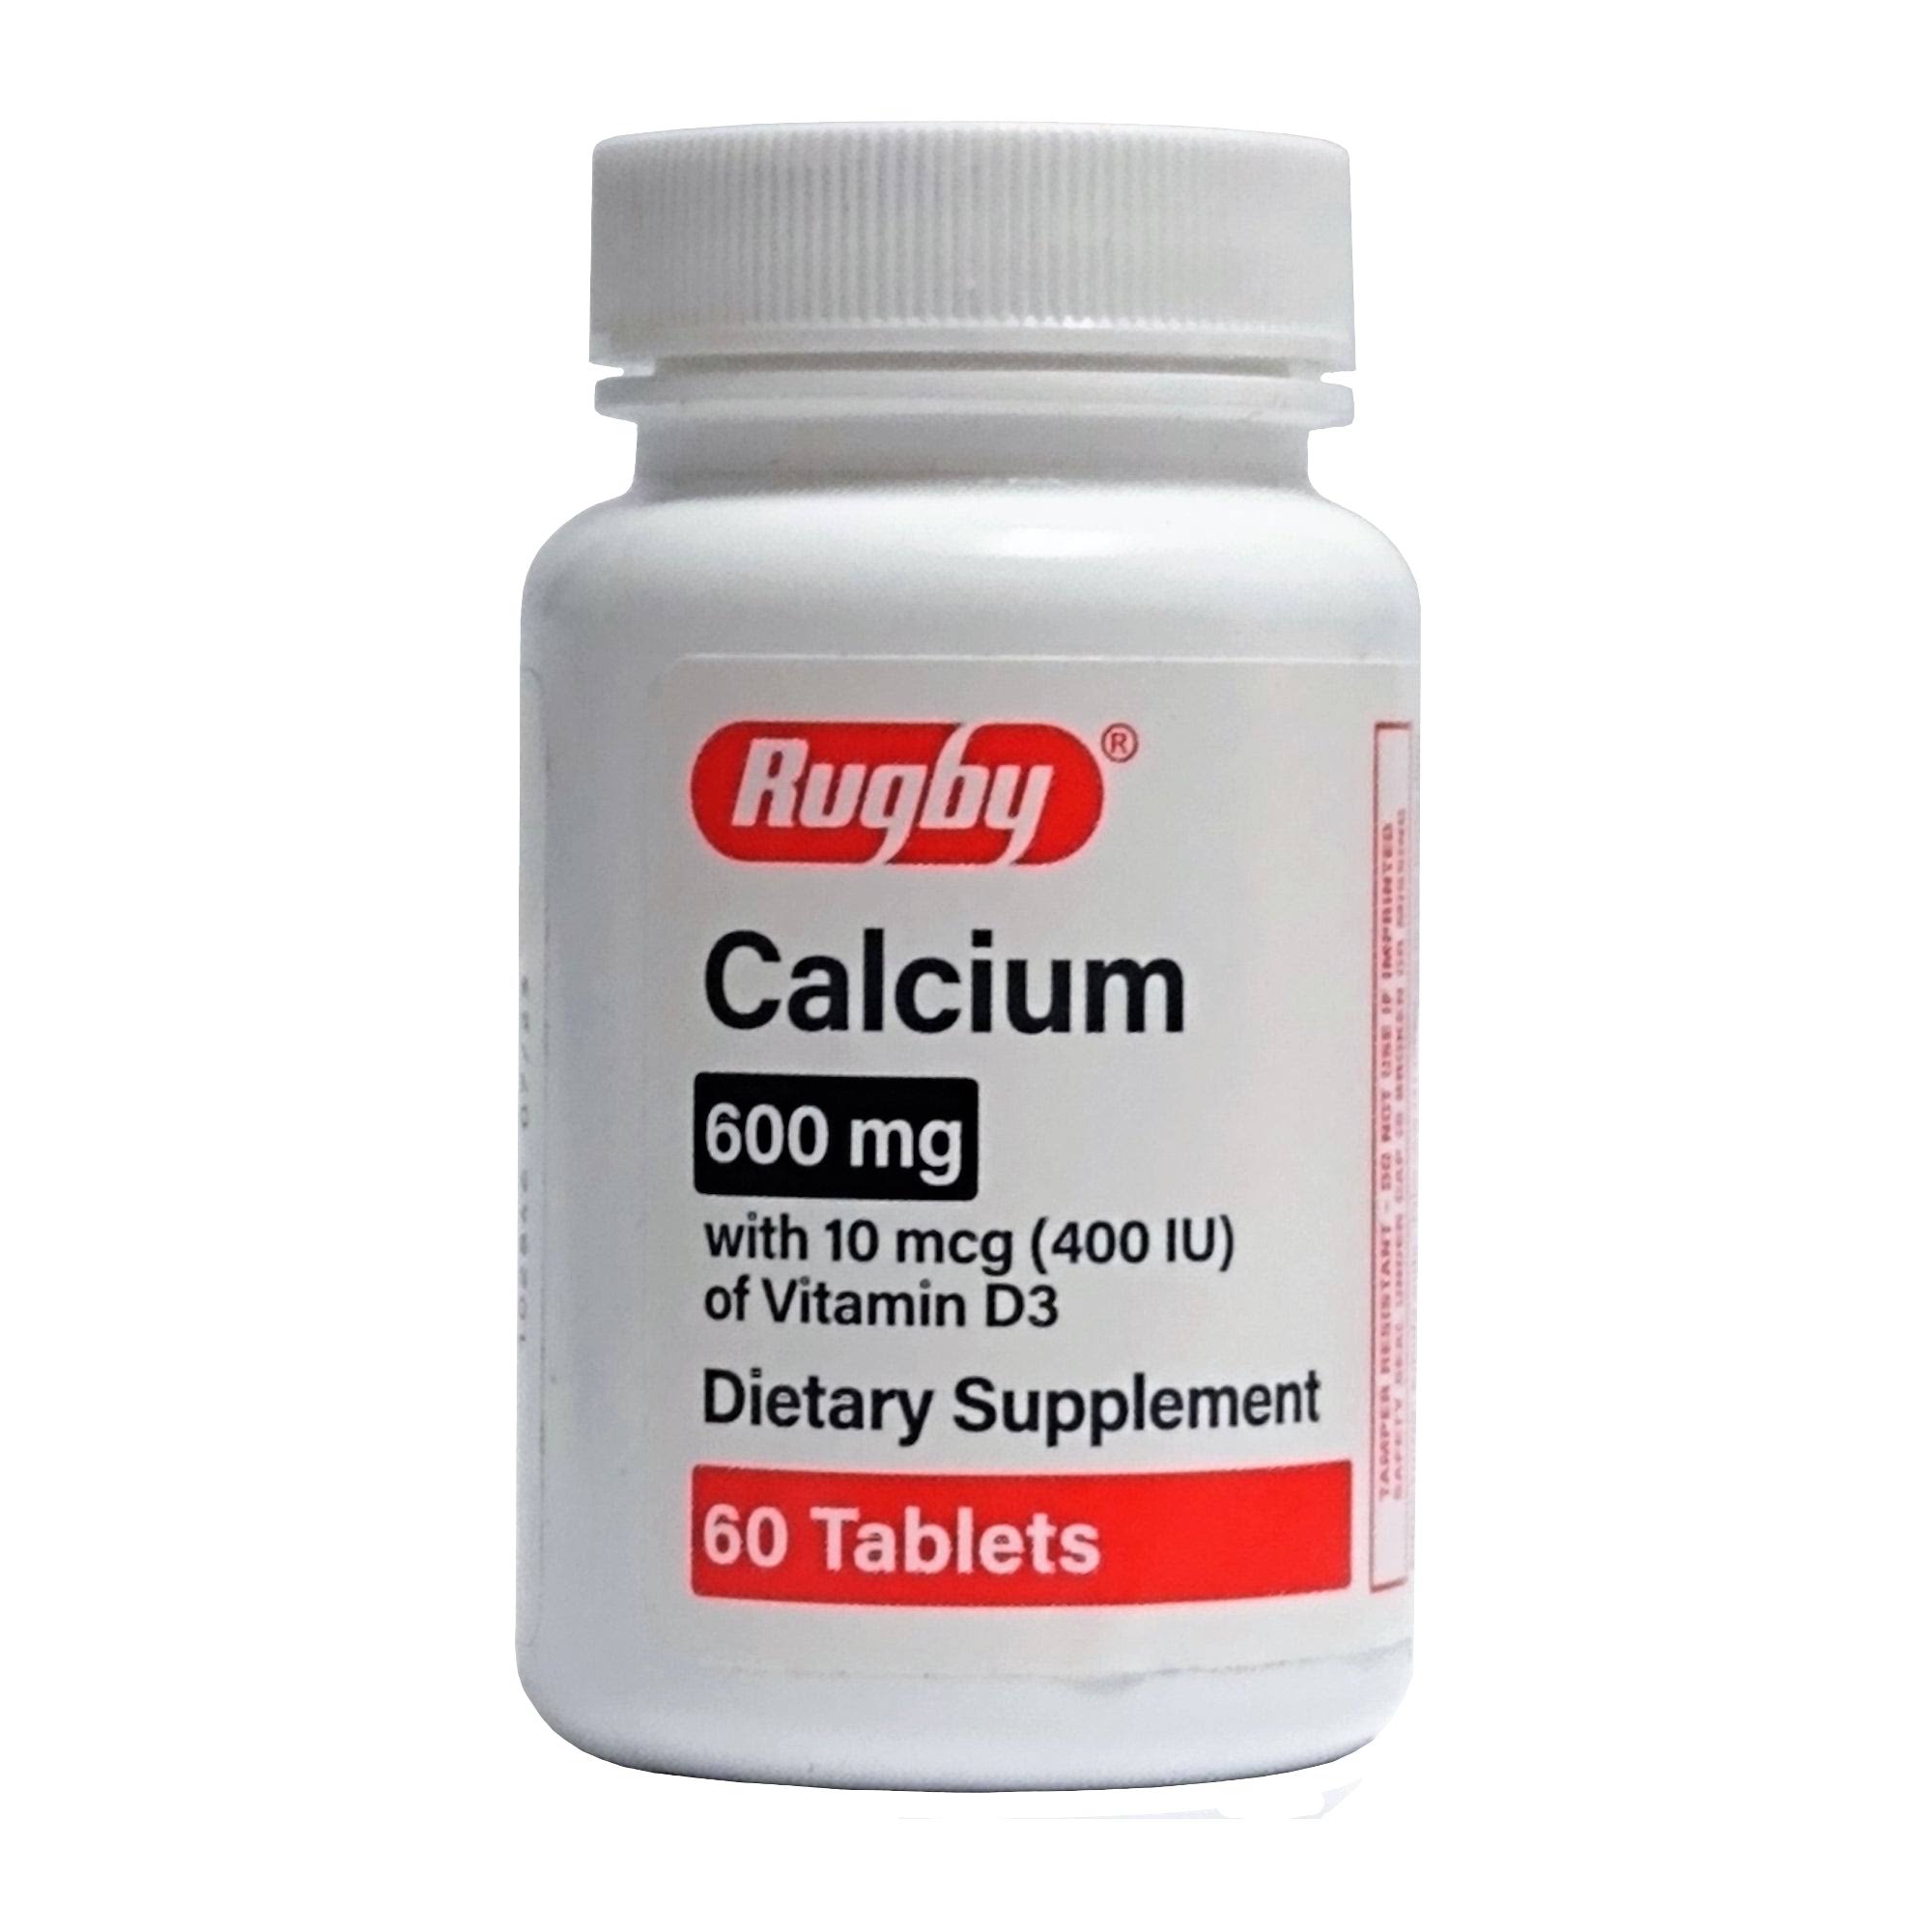 Rugby Calcium 500 mg 60 Tablets, One Bottle, by Rugby Laboratories